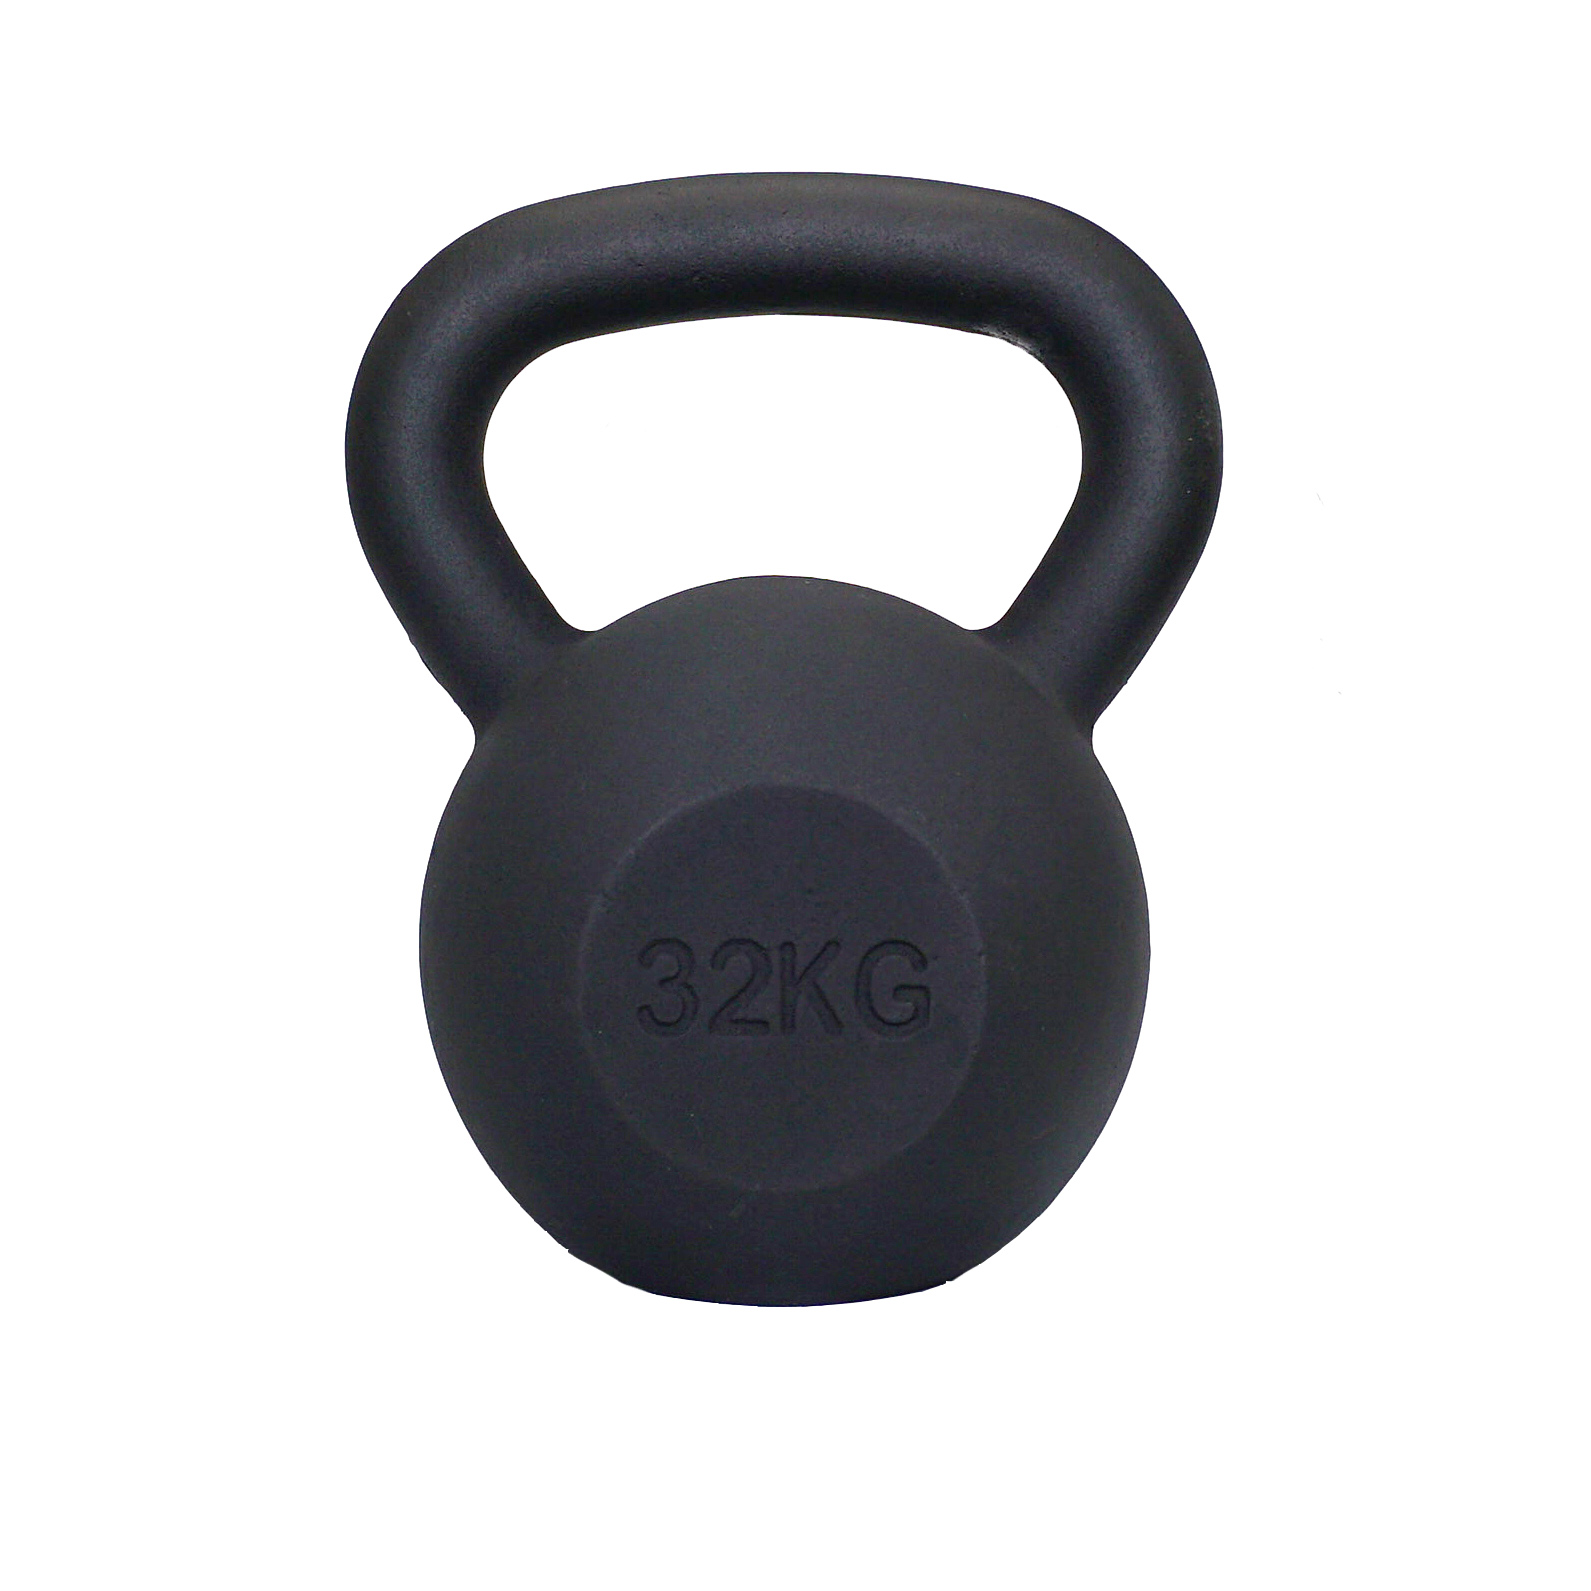 Synergee Vinyl Coated Cast Iron Kettlebell Weights for Strength Training Conditioning and Functional Fitness Available from 5 to 50lbs. 